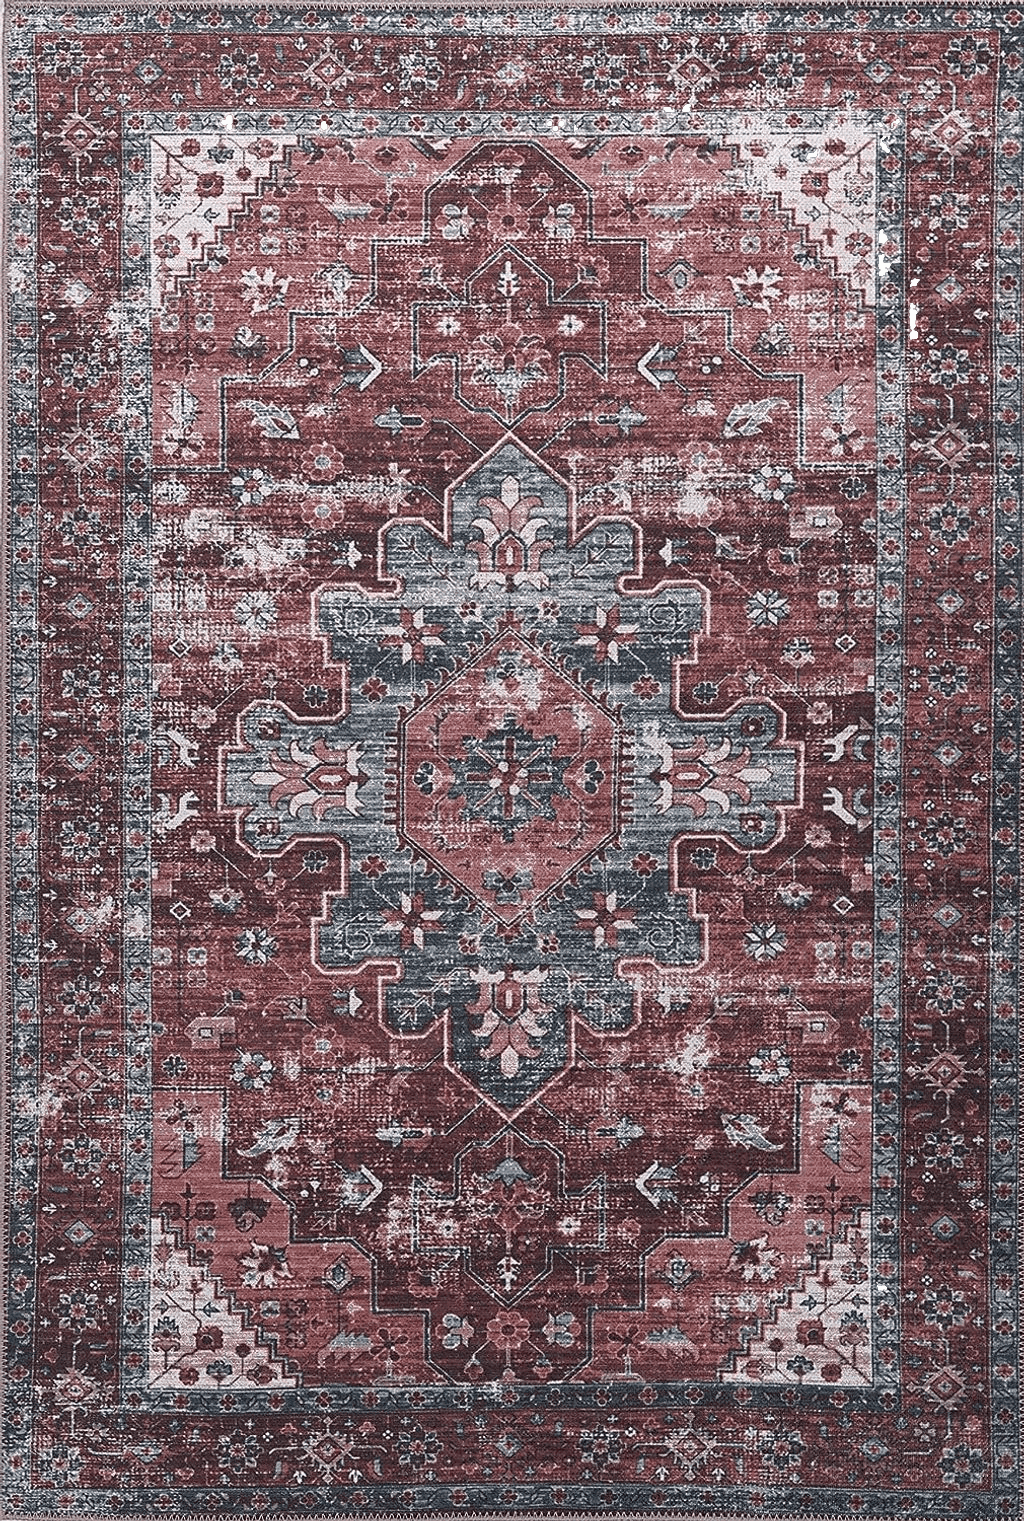 3x5 Adiva Rugs Machine Washable Area Rug with Non Slip Backing for Living Room, Bedroom, Bathroom, Kitchen, Printed Persian Vintage Home Decor, Floor Decoration Carpet Mat (Terra, 3' x 5')